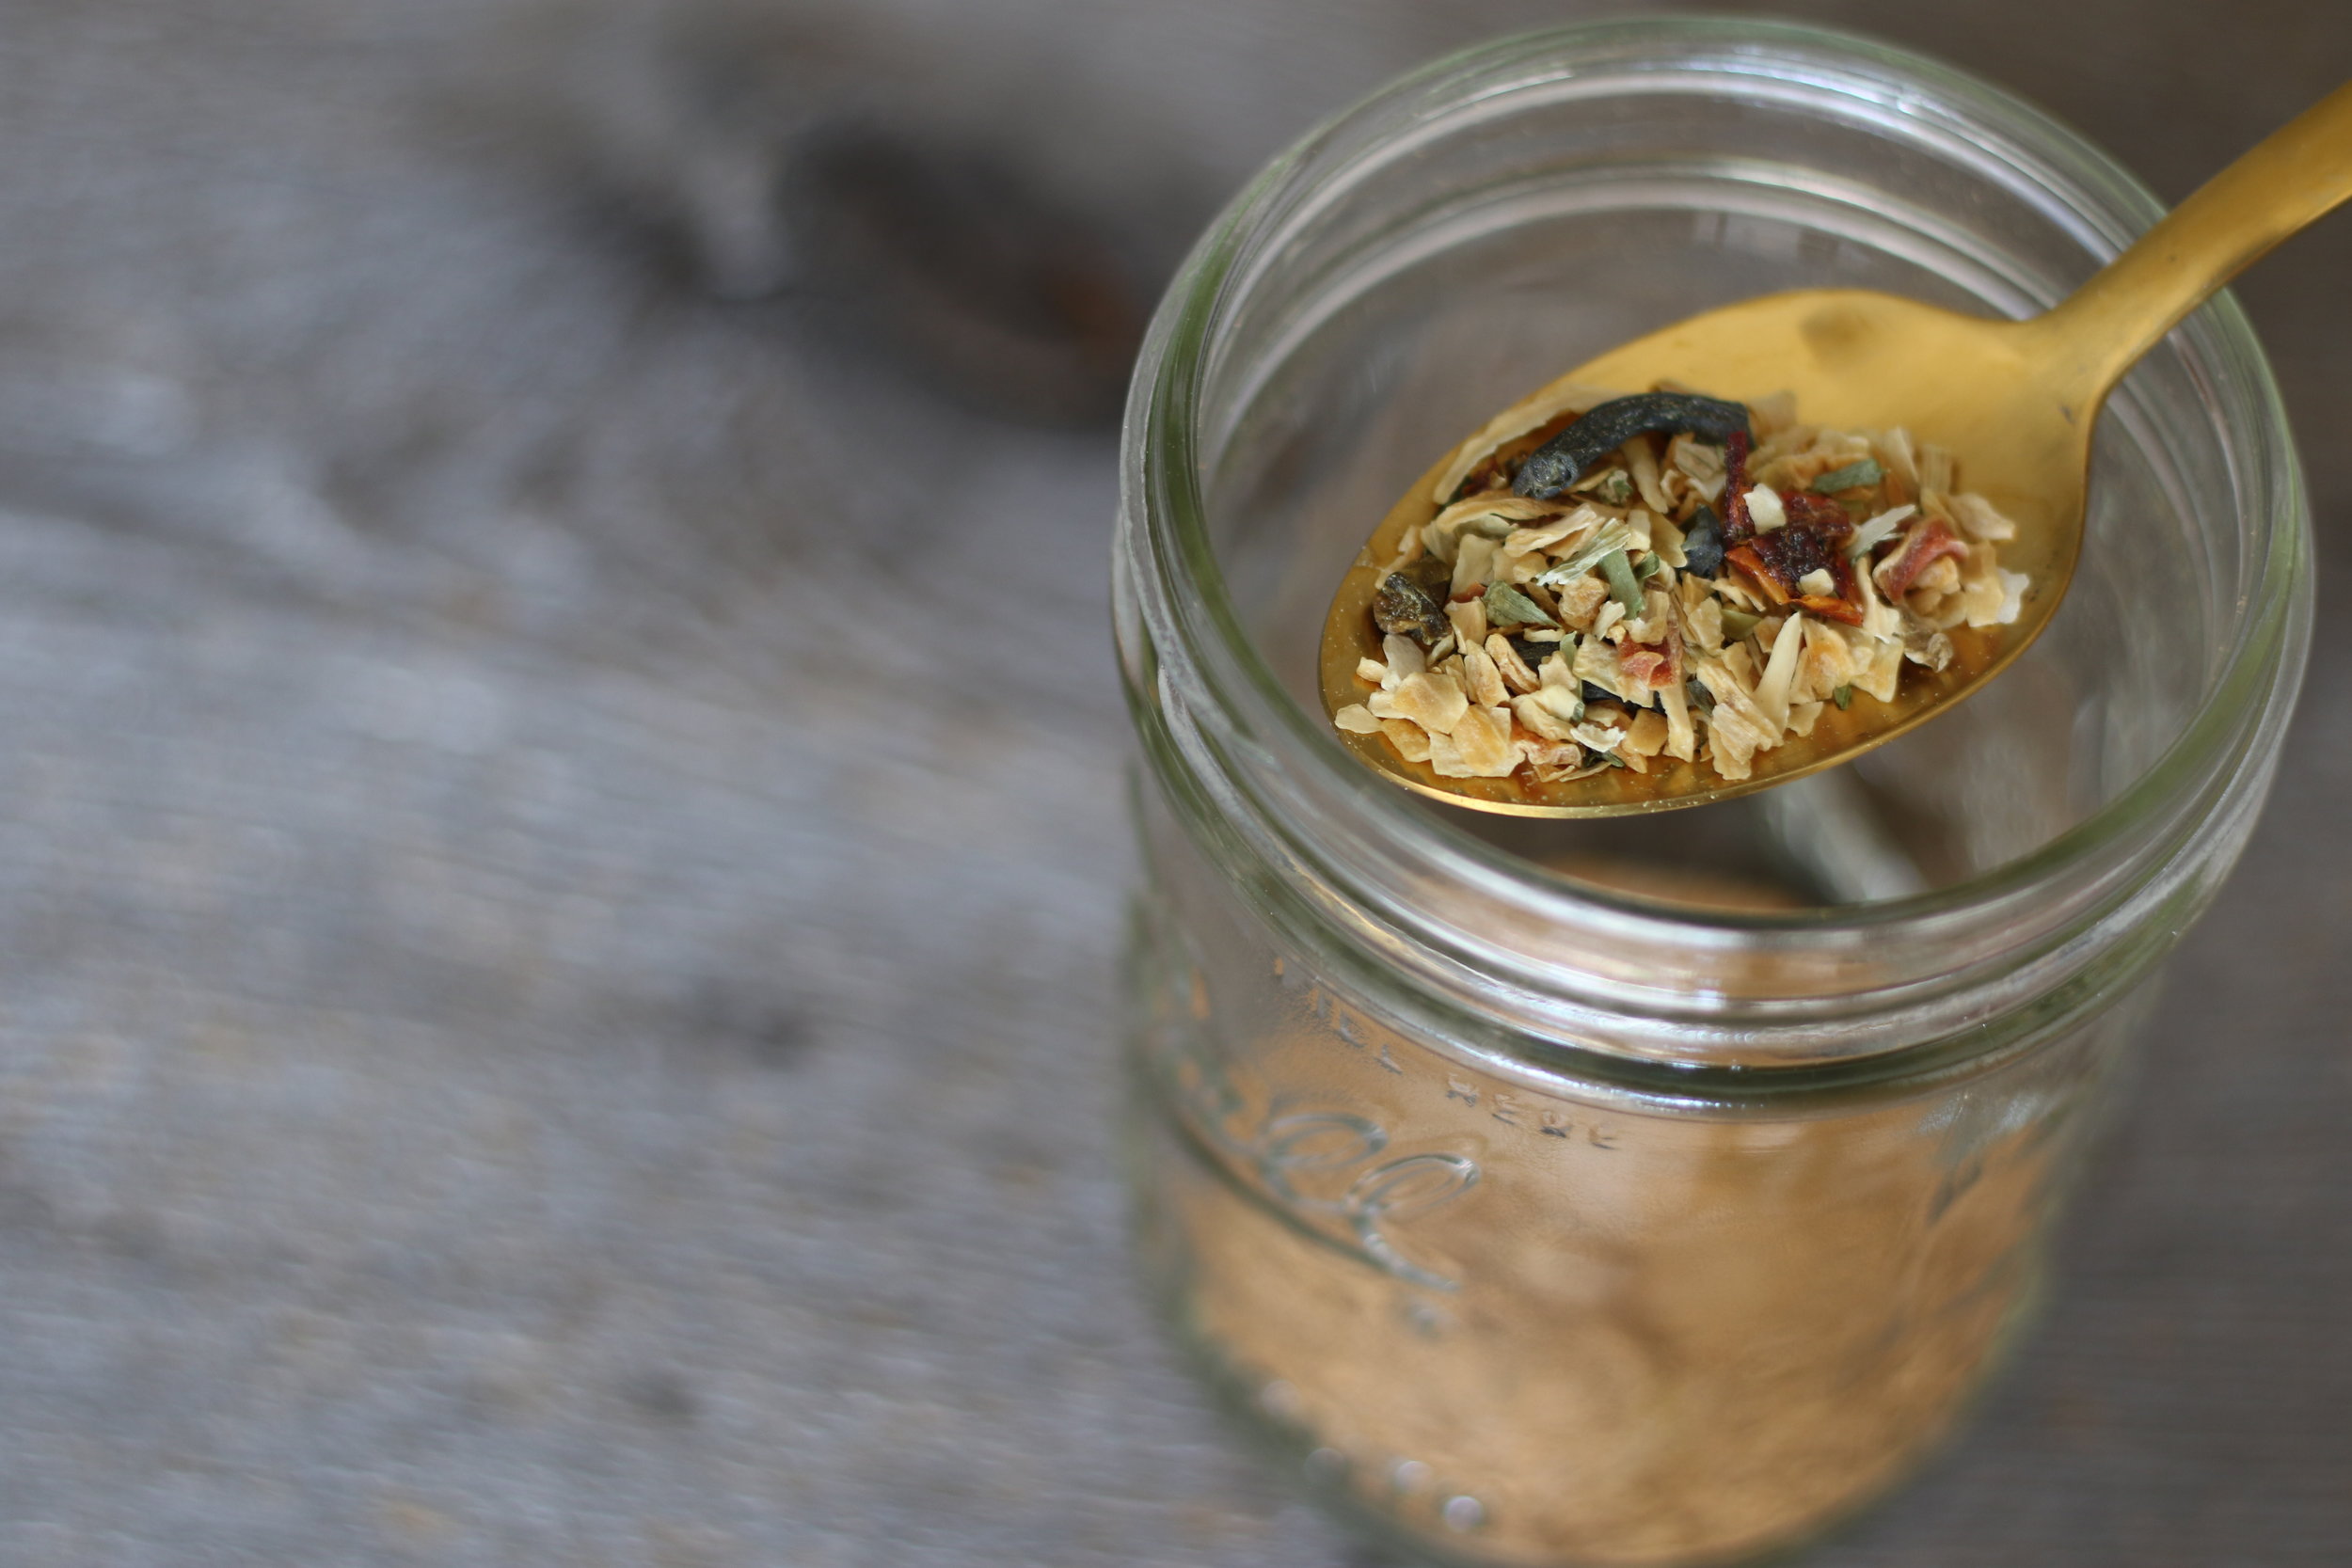 Alt text: a small mason jar of spices sites on a wooden tabletop. At the top of the image, you can see a gold spoon pulling out of the jar with colorful spices in it.